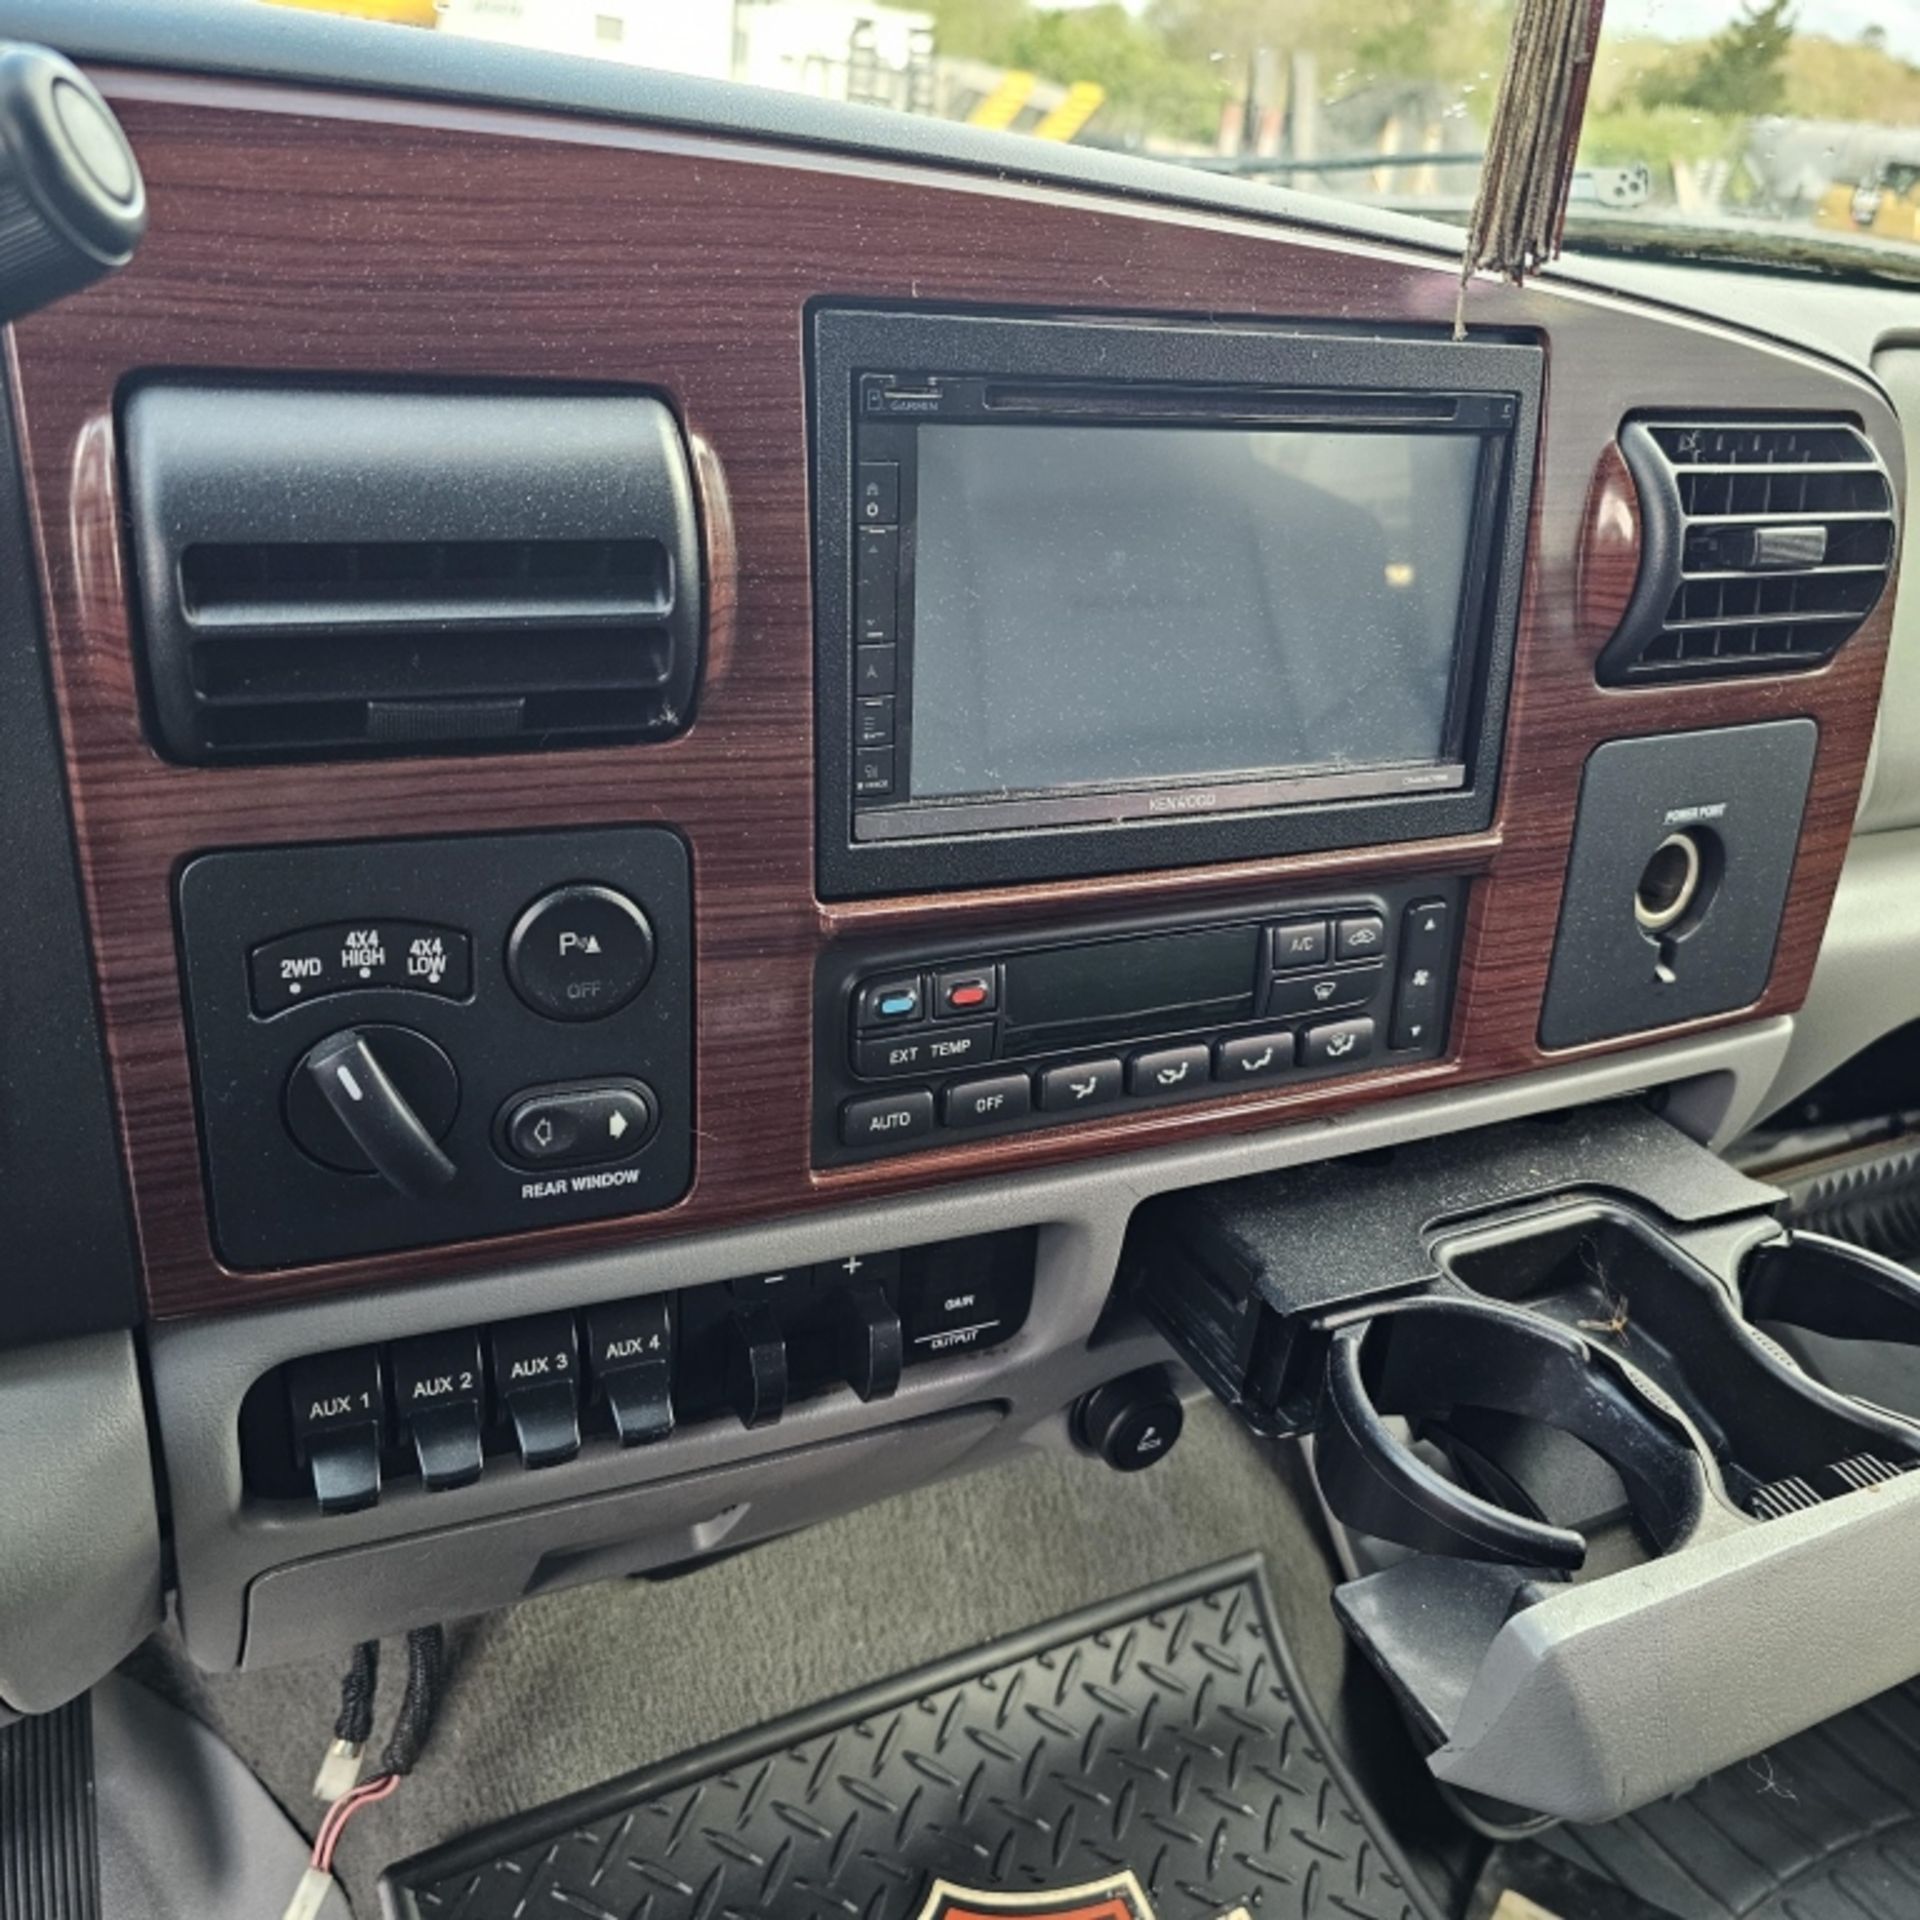 2005 Ford F350 Pickup - Image 4 of 8